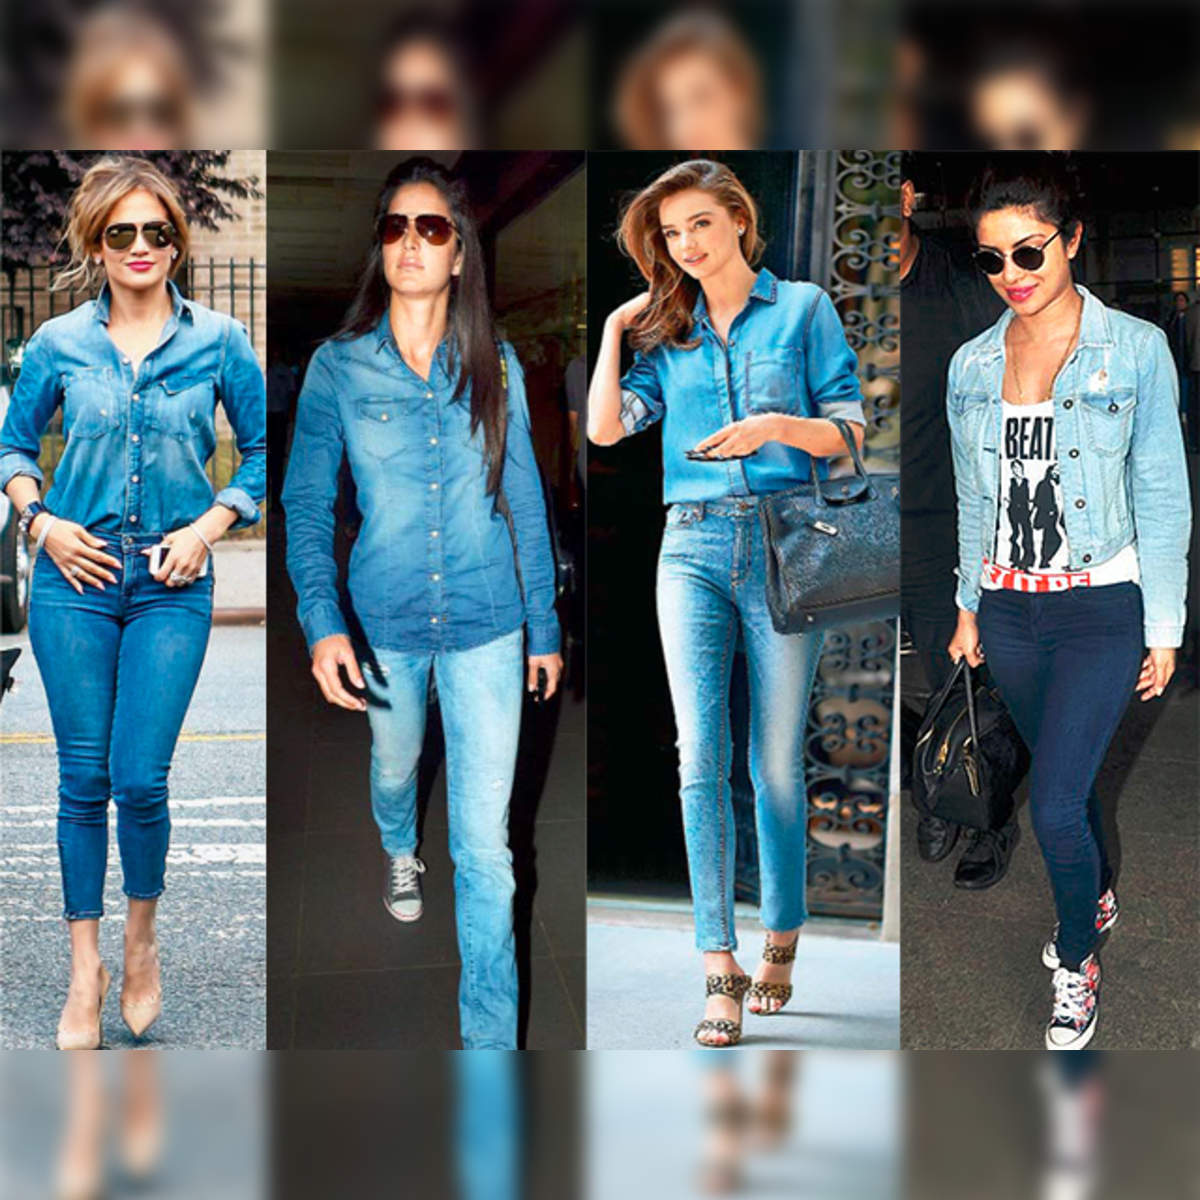 How to style a denim look